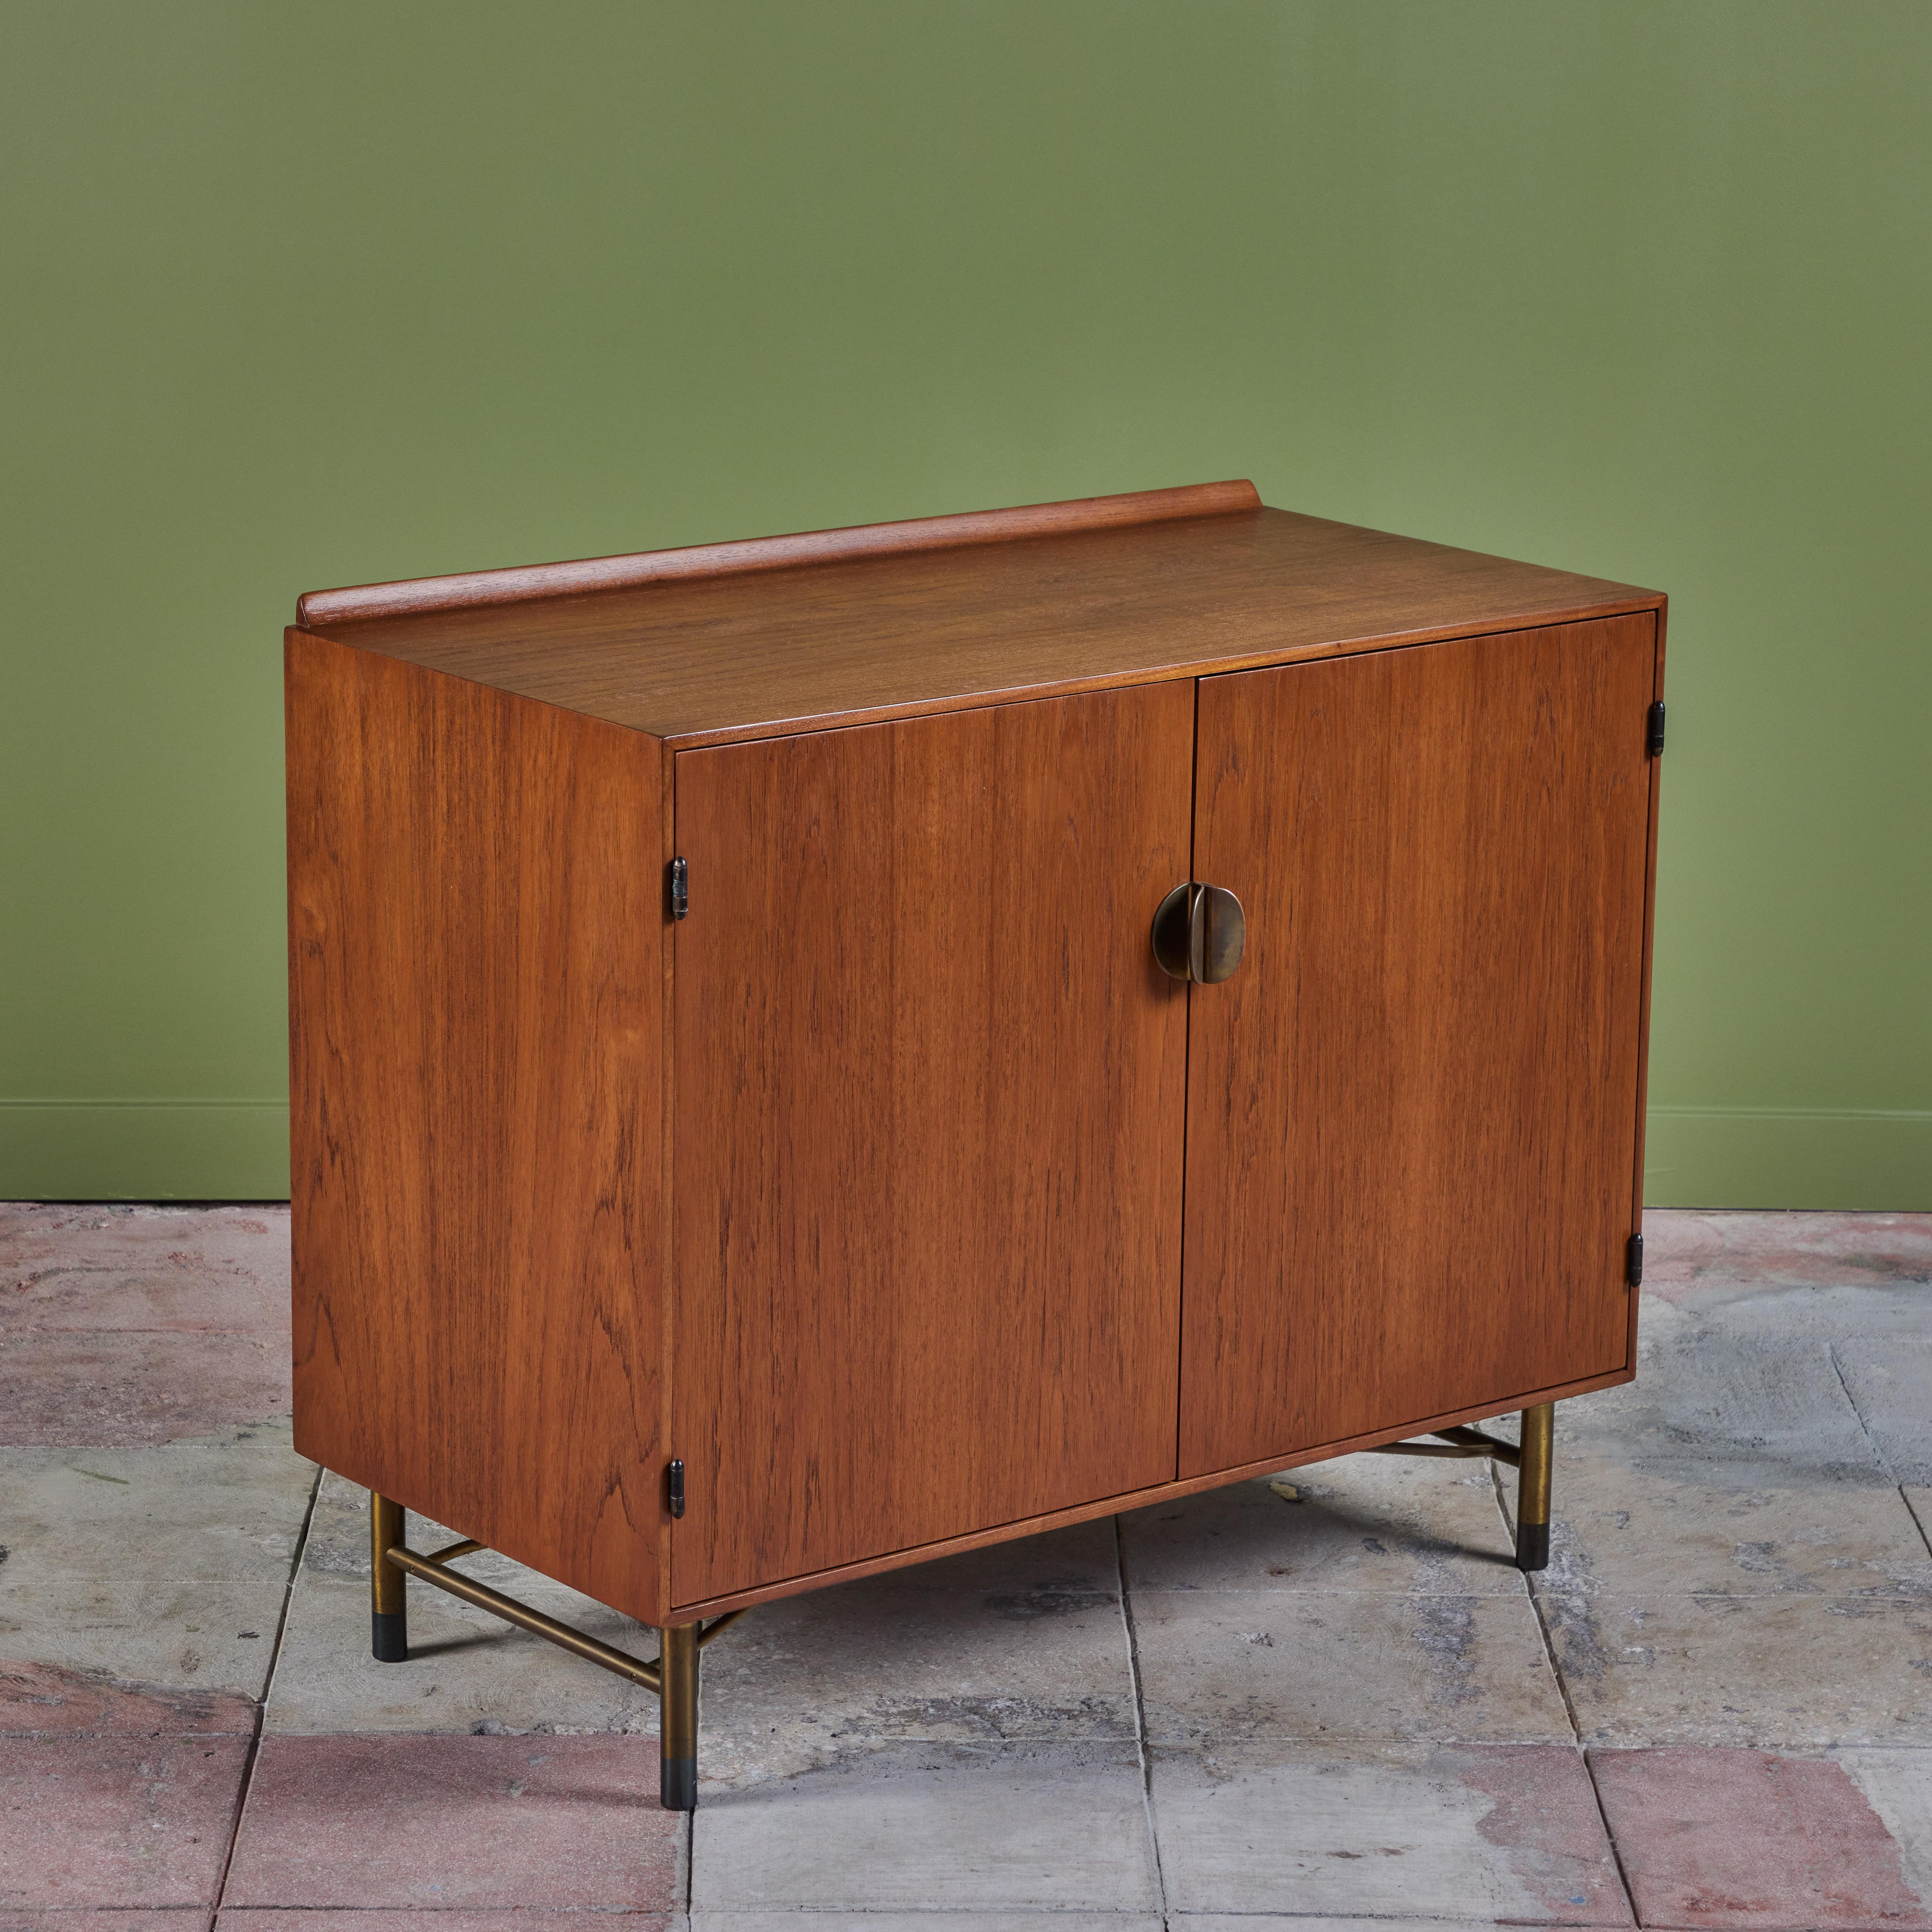 Finn Juhl designed this walnut cabinet for American manufacturer Baker furniture in the 1950s for their 